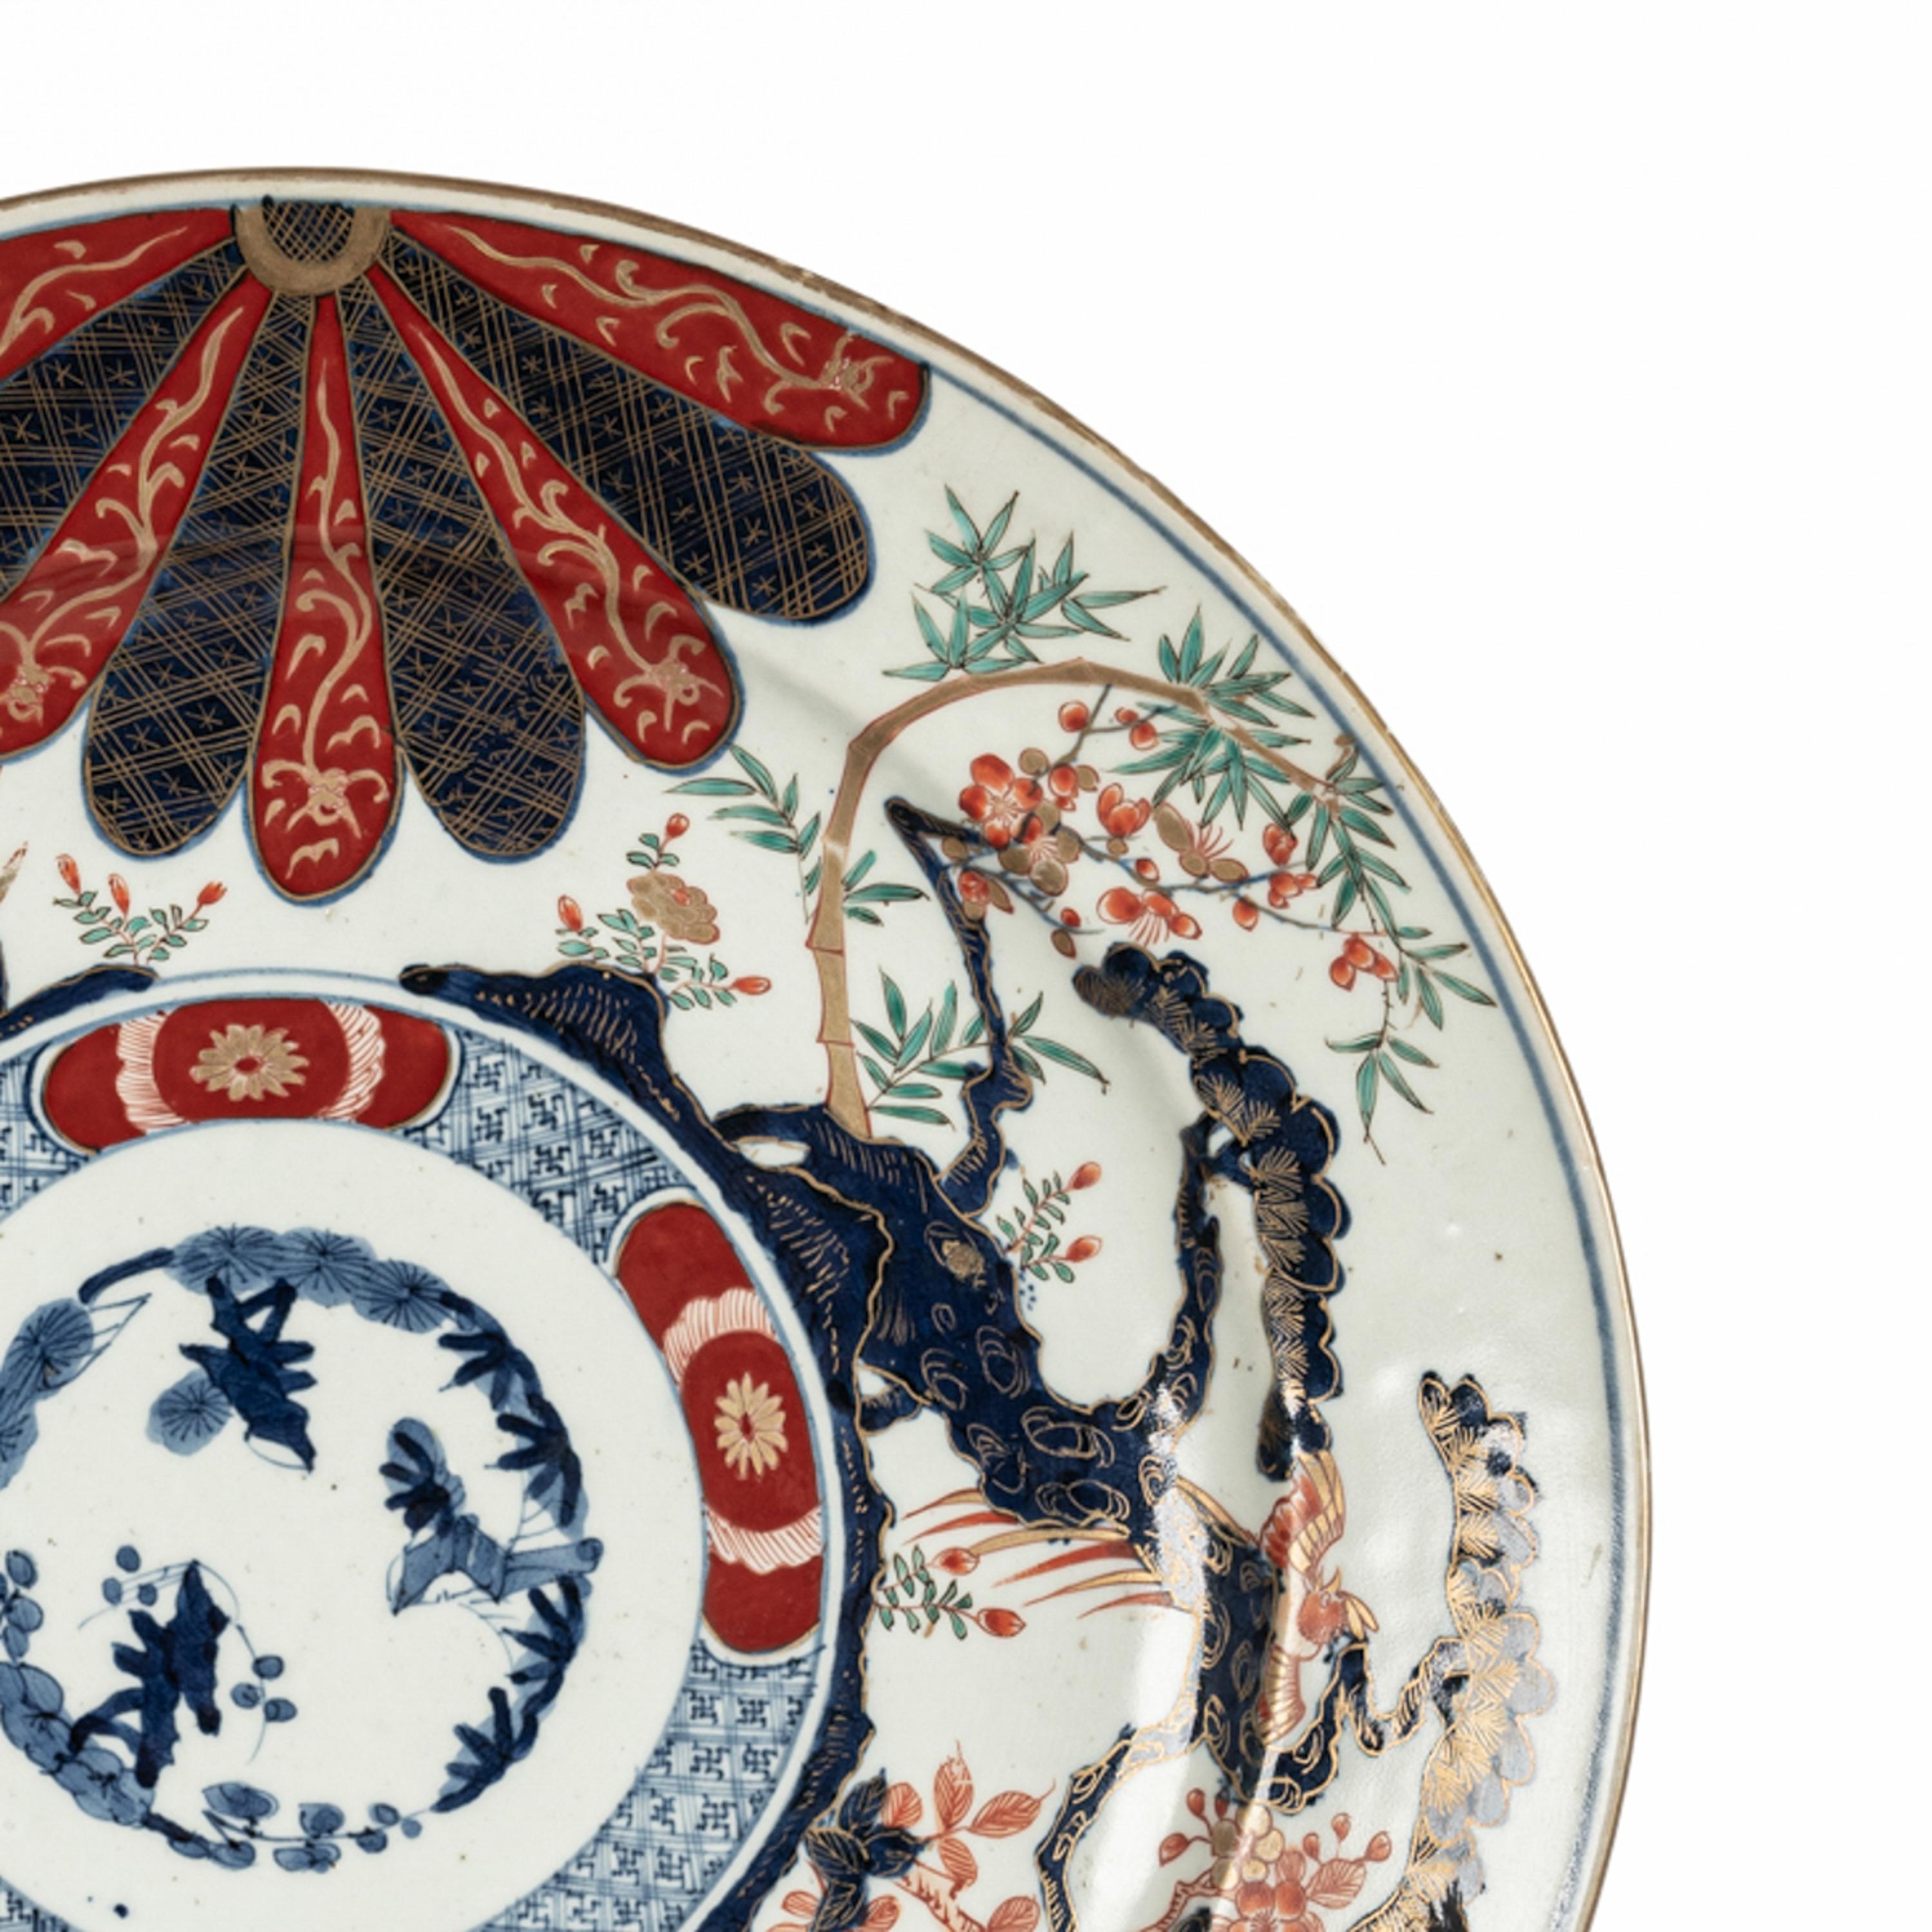 Monumental Antique Japanese Meiji Period Imari Porcelain Charger Plate 1880 For Sale 4